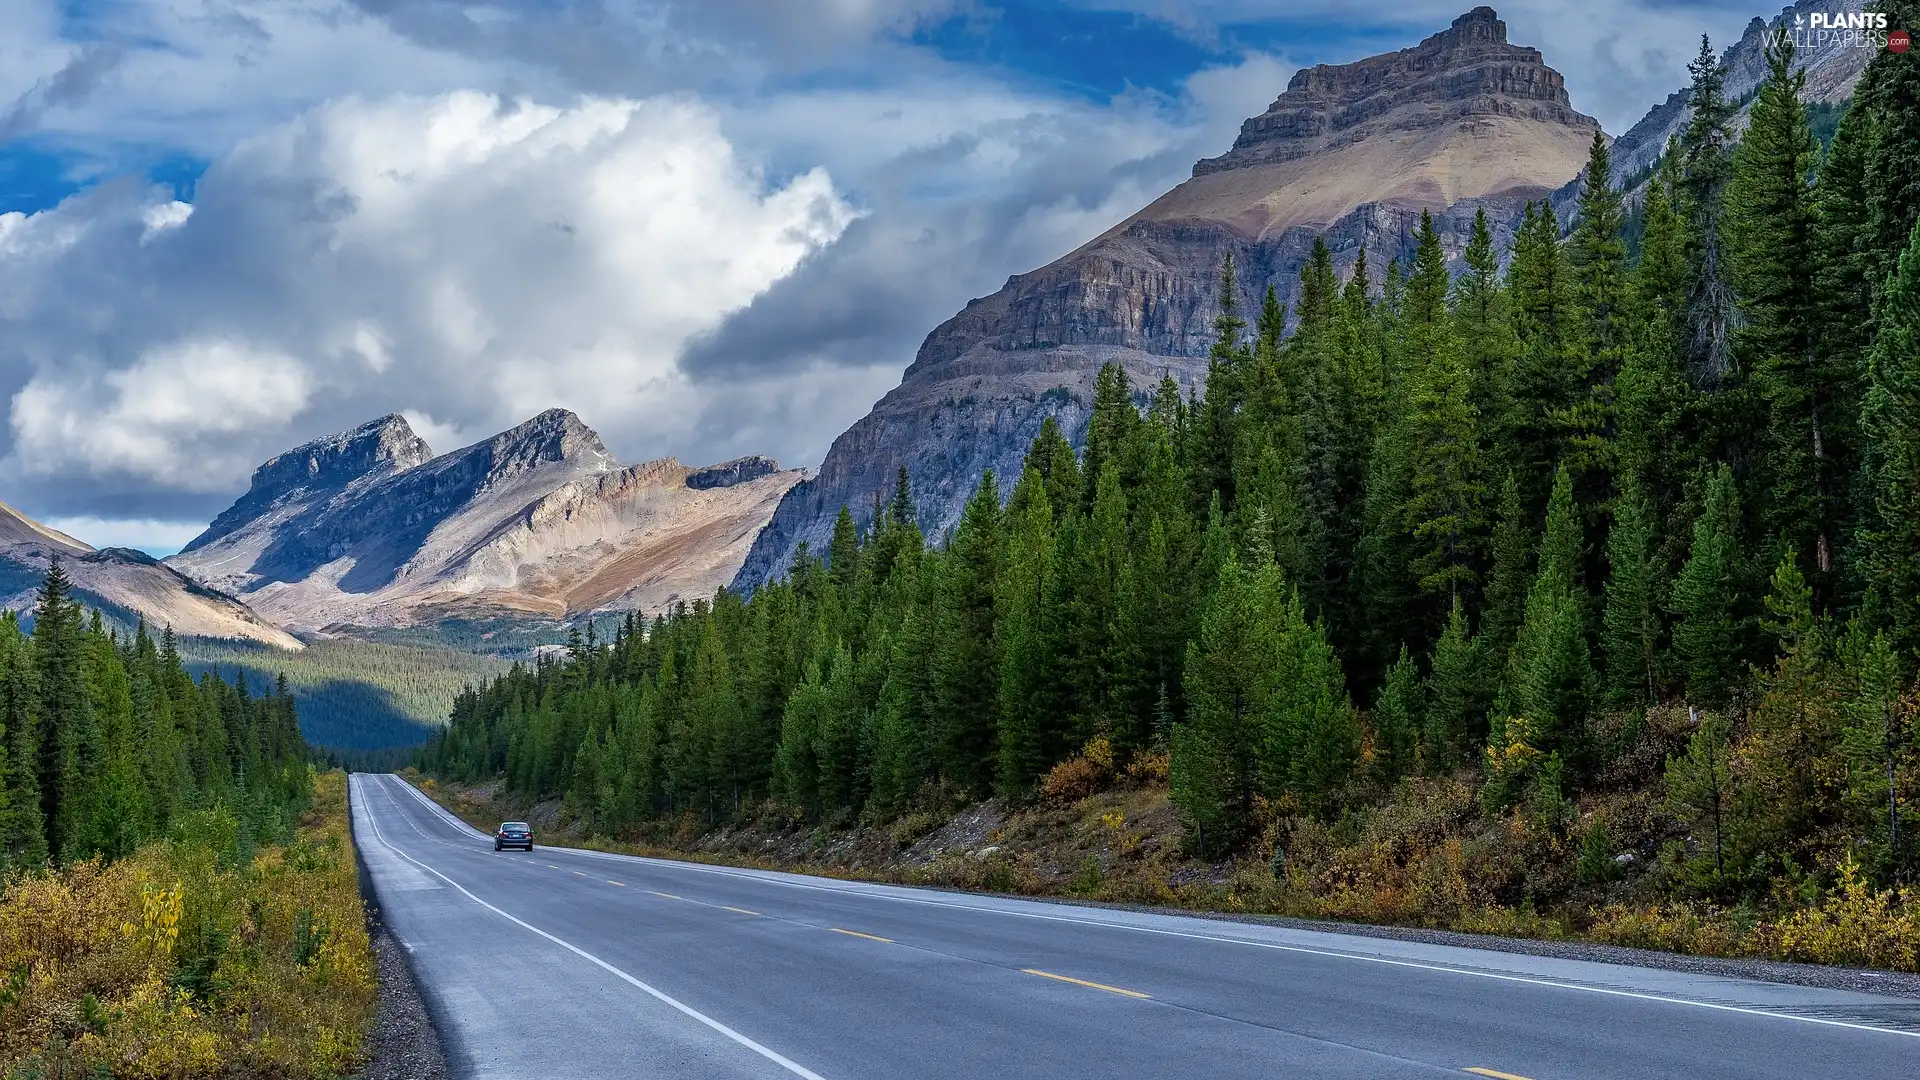 Way, rocky mountains, Automobile, forest, Province of Alberta, Canada, viewes, Spruces, trees